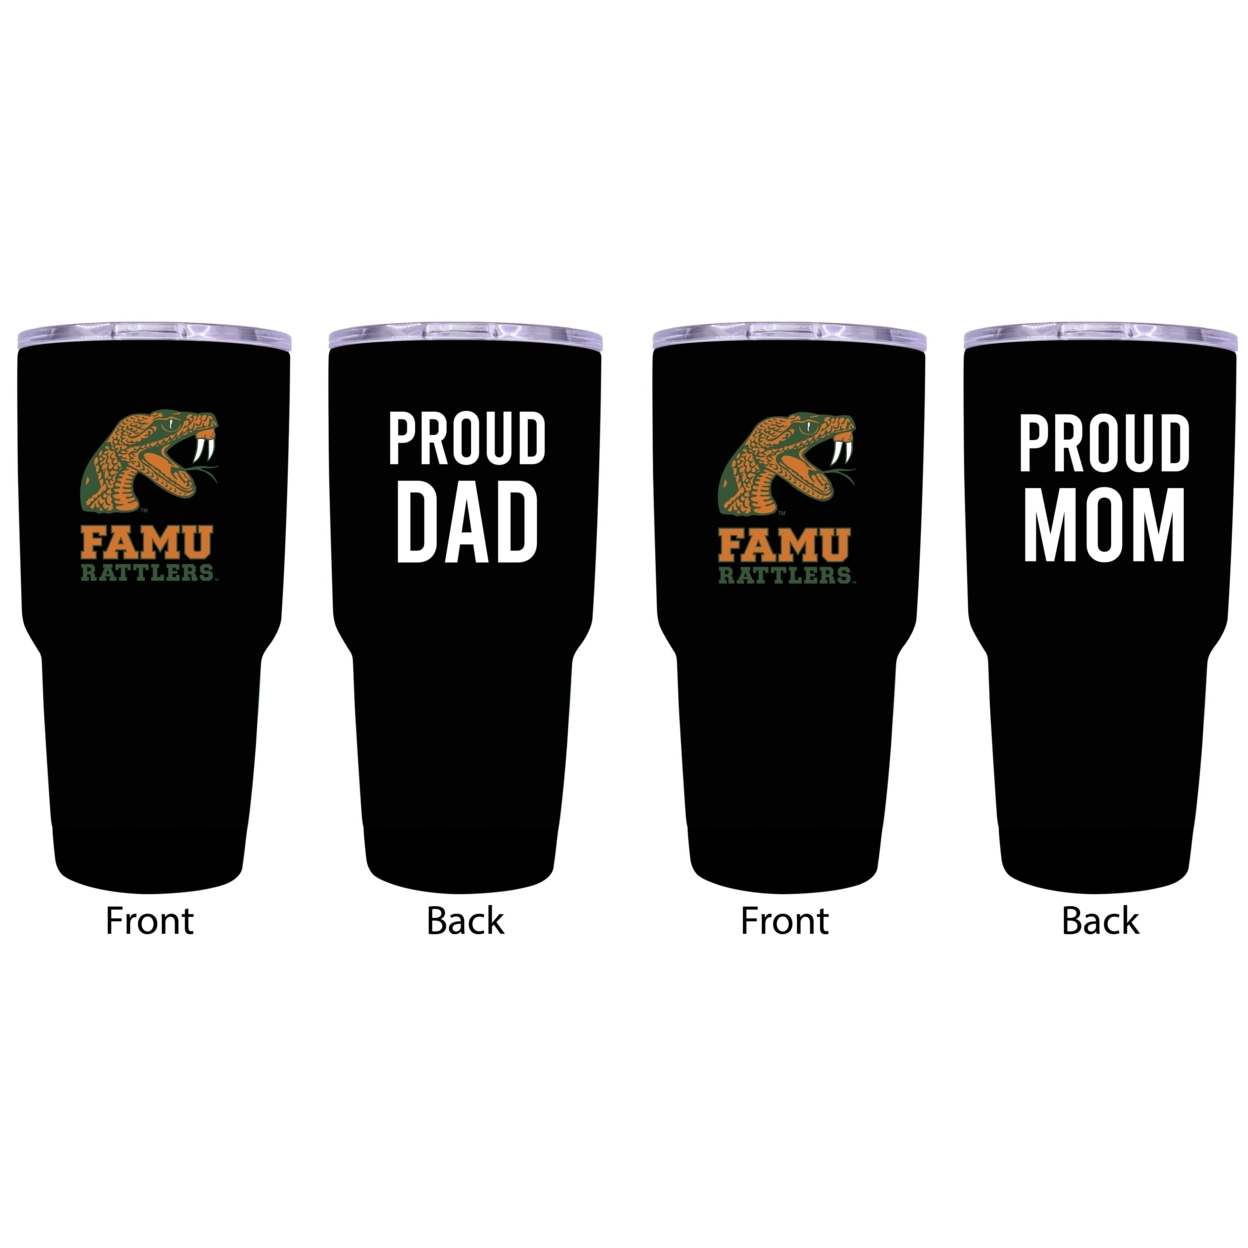 Florida A&M Rattlers Proud Mom And Dad 24 Oz Insulated Stainless Steel Tumblers 2 Pack Black.